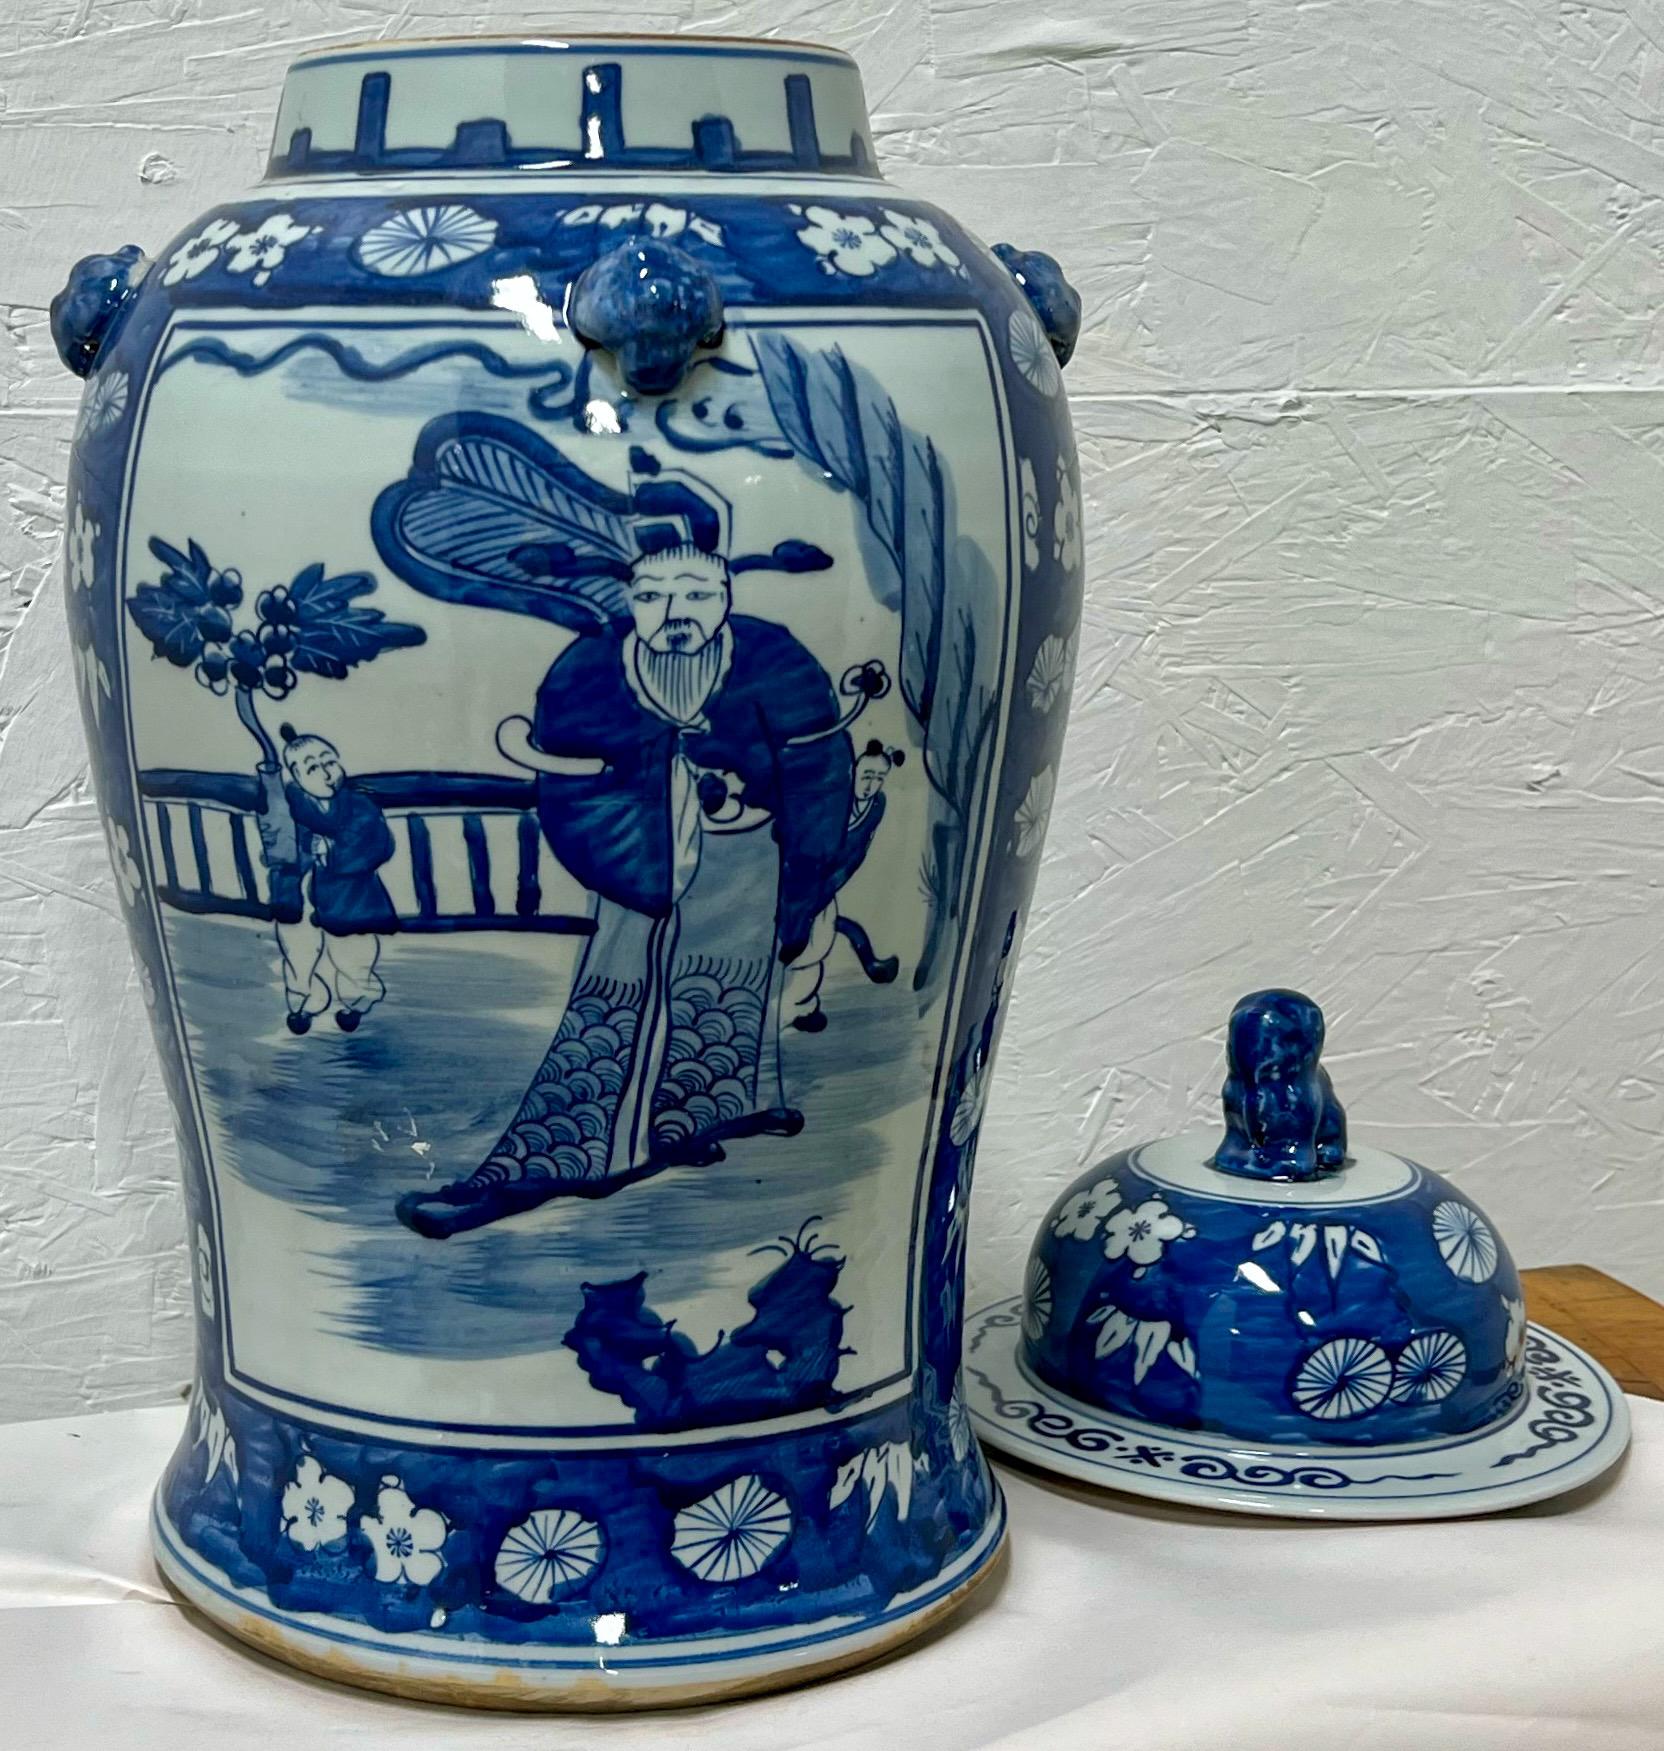 This is a late 20th century Chinese Export style Pair of blue and white ginger jars With foo dog finials and pastoral scenes. They are unmarked and in very good condition.